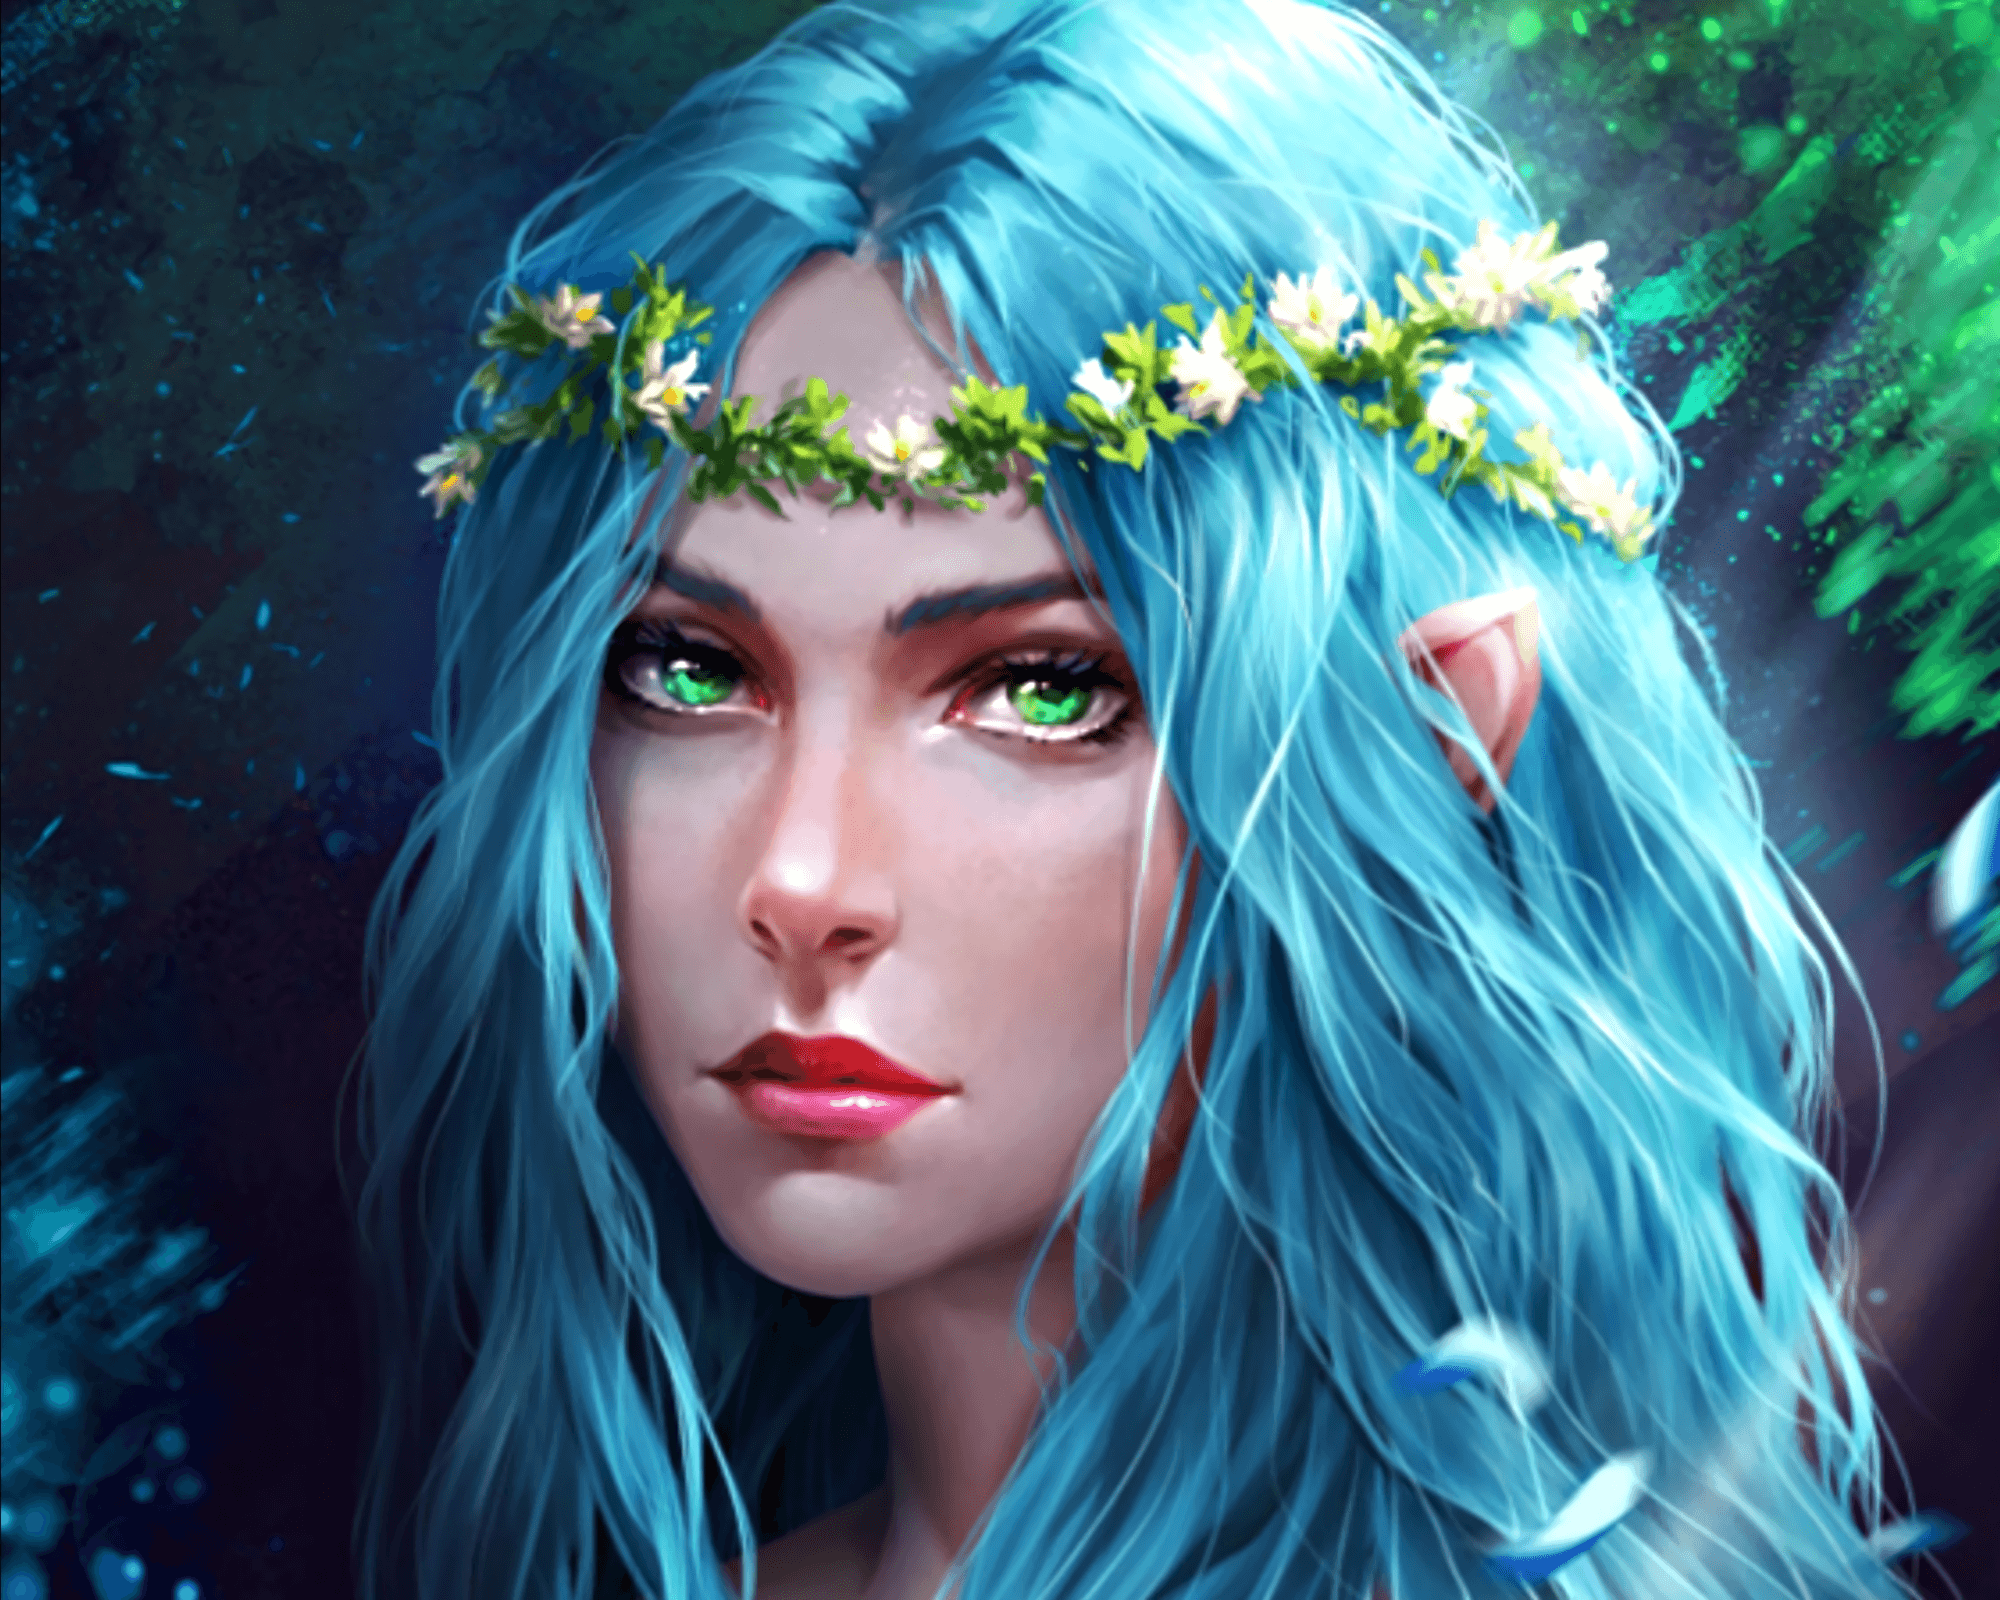 6. "Blue Haired Elf Character Inspiration" by Nerdy Nook - wide 7